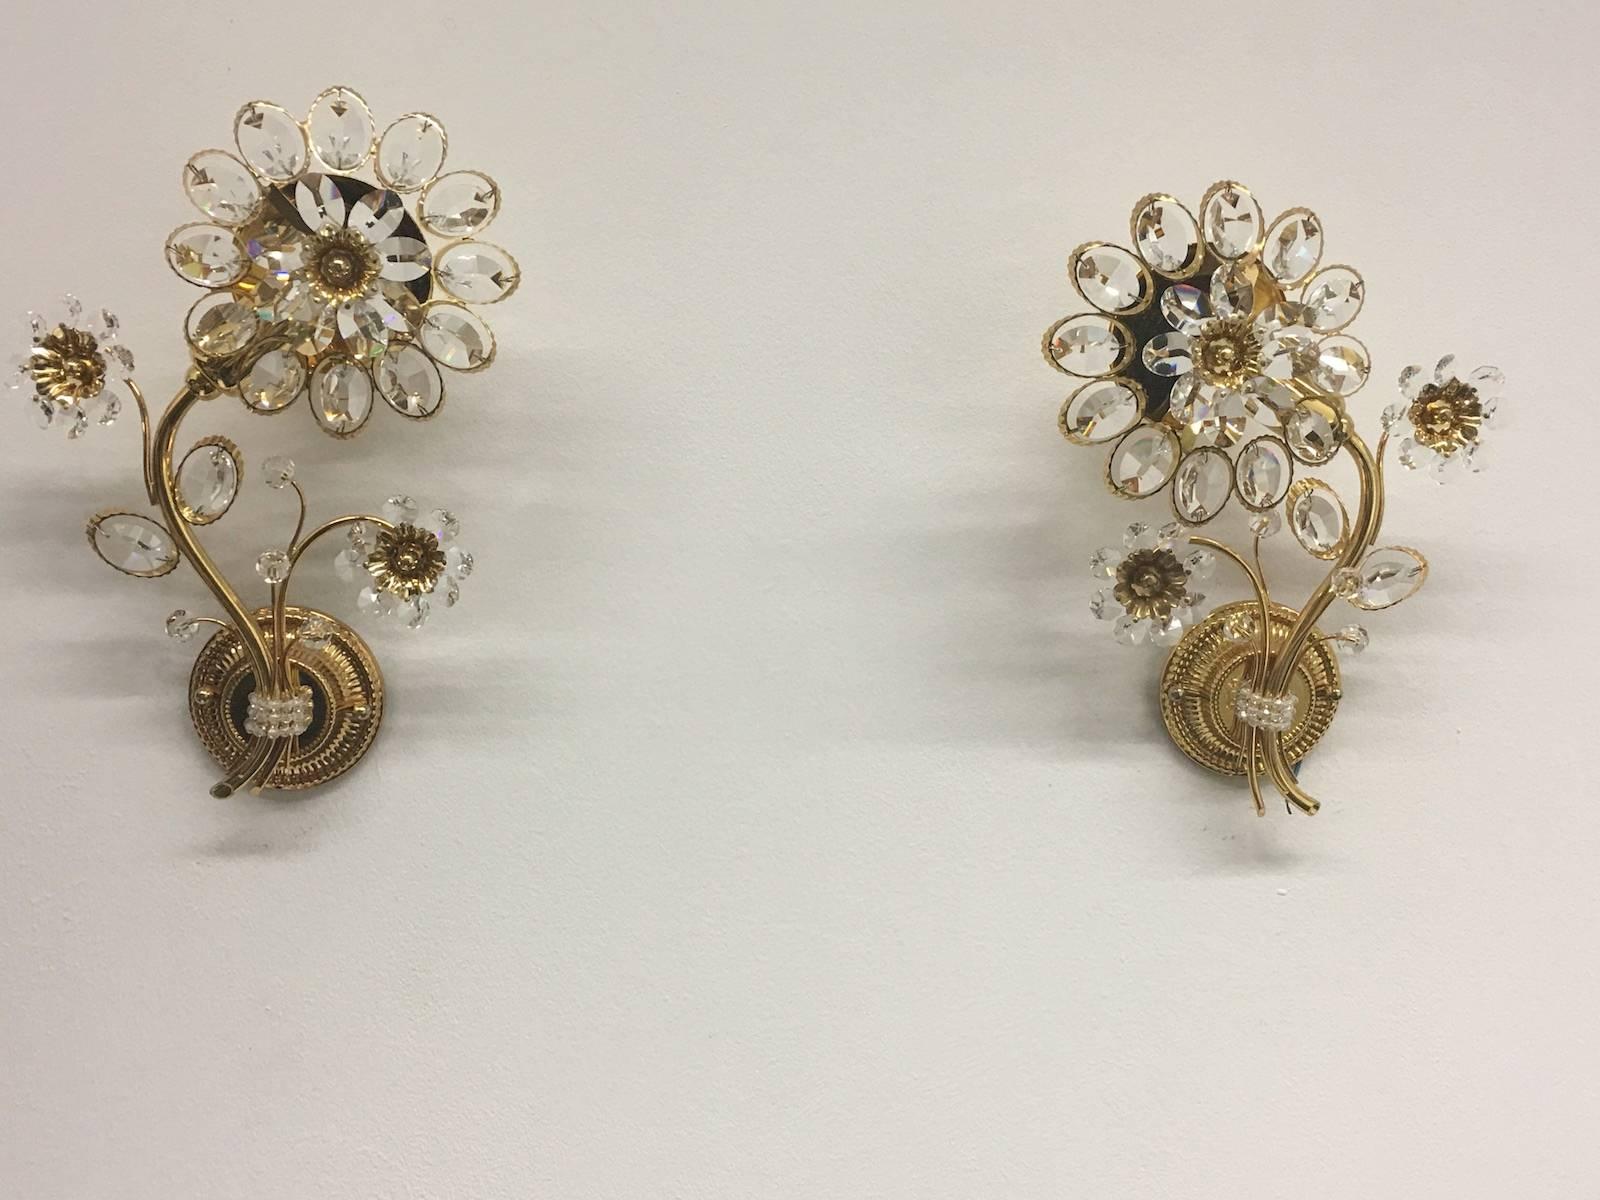 Pair of vintage gold-plated sconces with faceted crystal flowers made by the German company Palwa. Each fixture has one European style E14 socket. It requires one European E14 candelabra bulb.